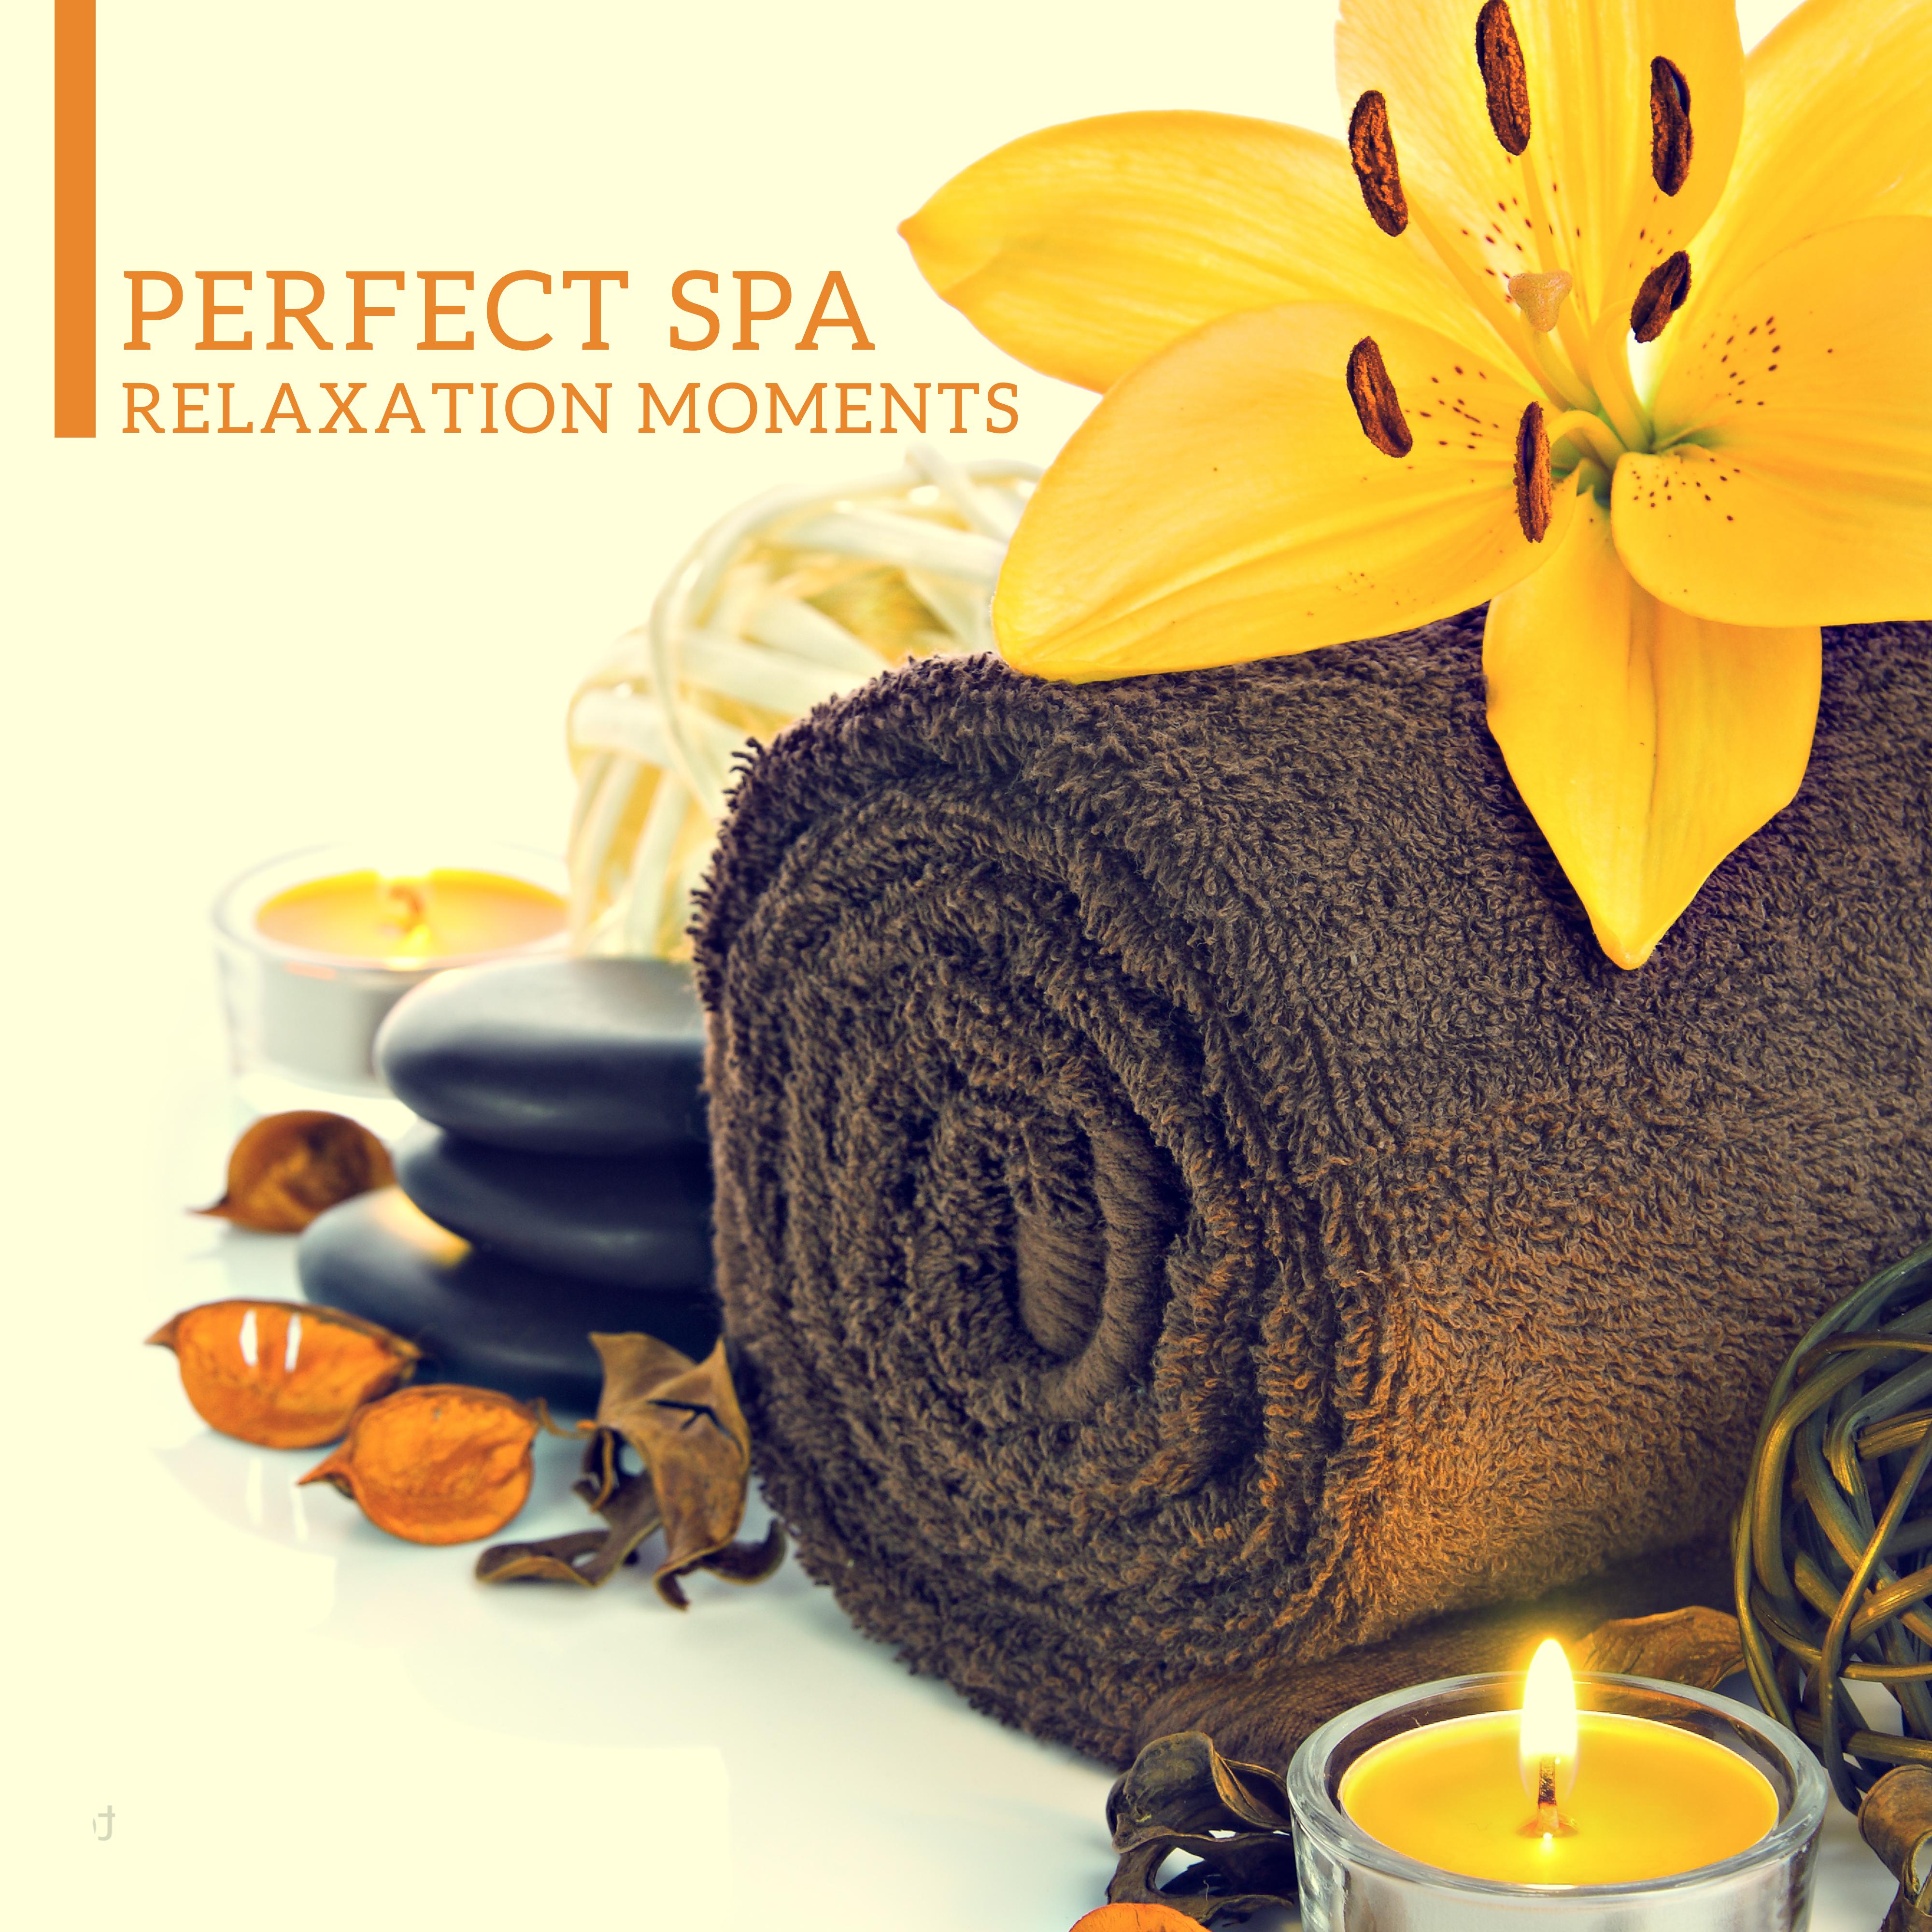 Perfect Spa Relaxation Moments with New Age Music